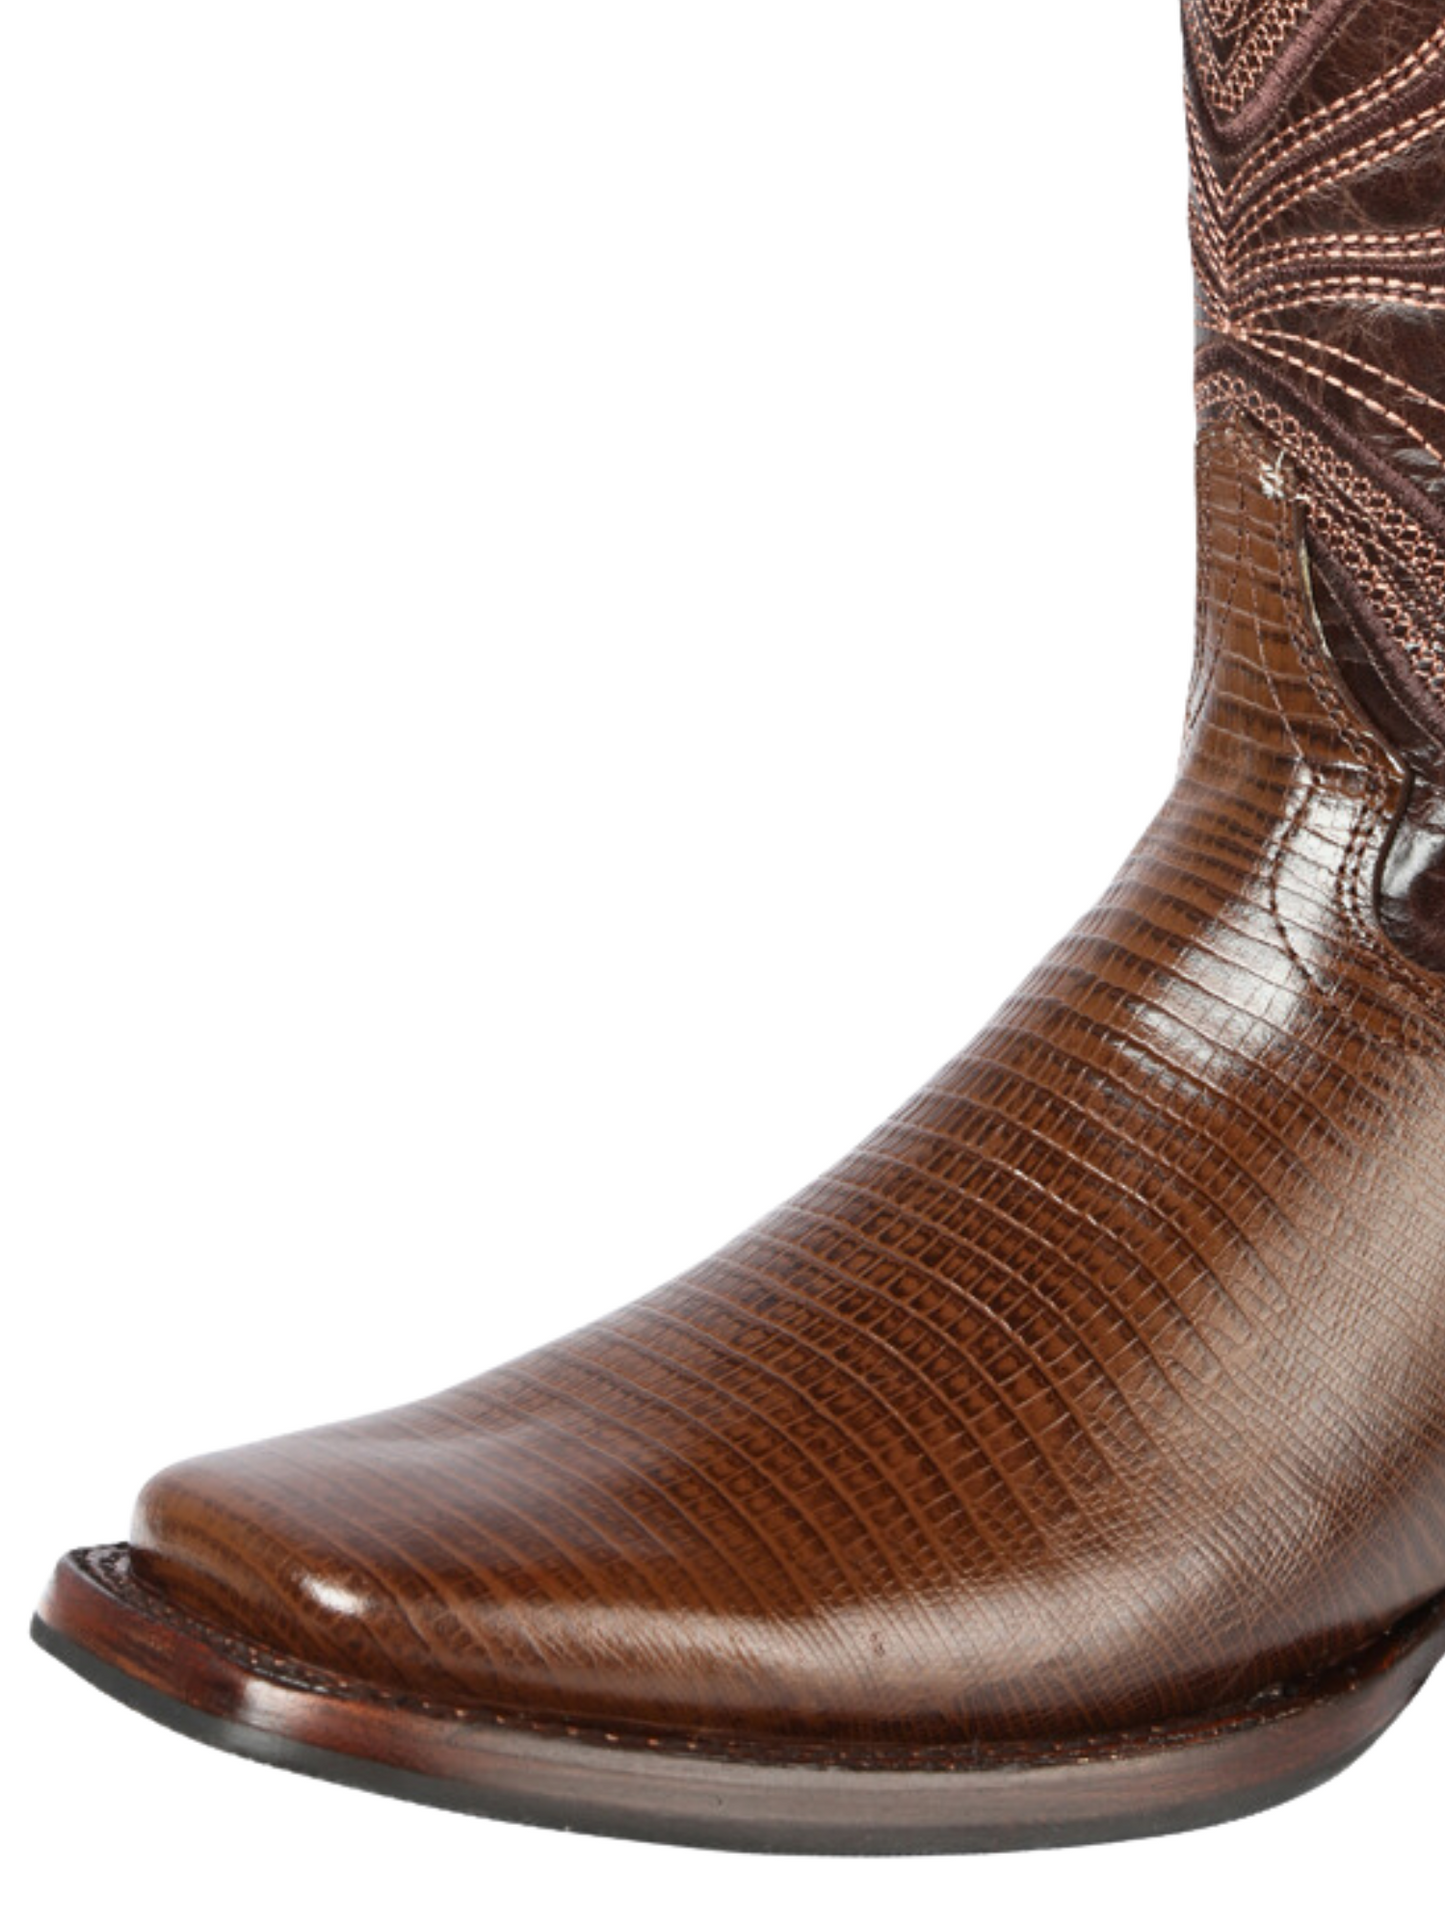 Rodeo Cowboy Boots Imitation of Lizard Engraved in Cowhide Leather for Men 'El General' - ID: 44674 Cowboy Boots El General